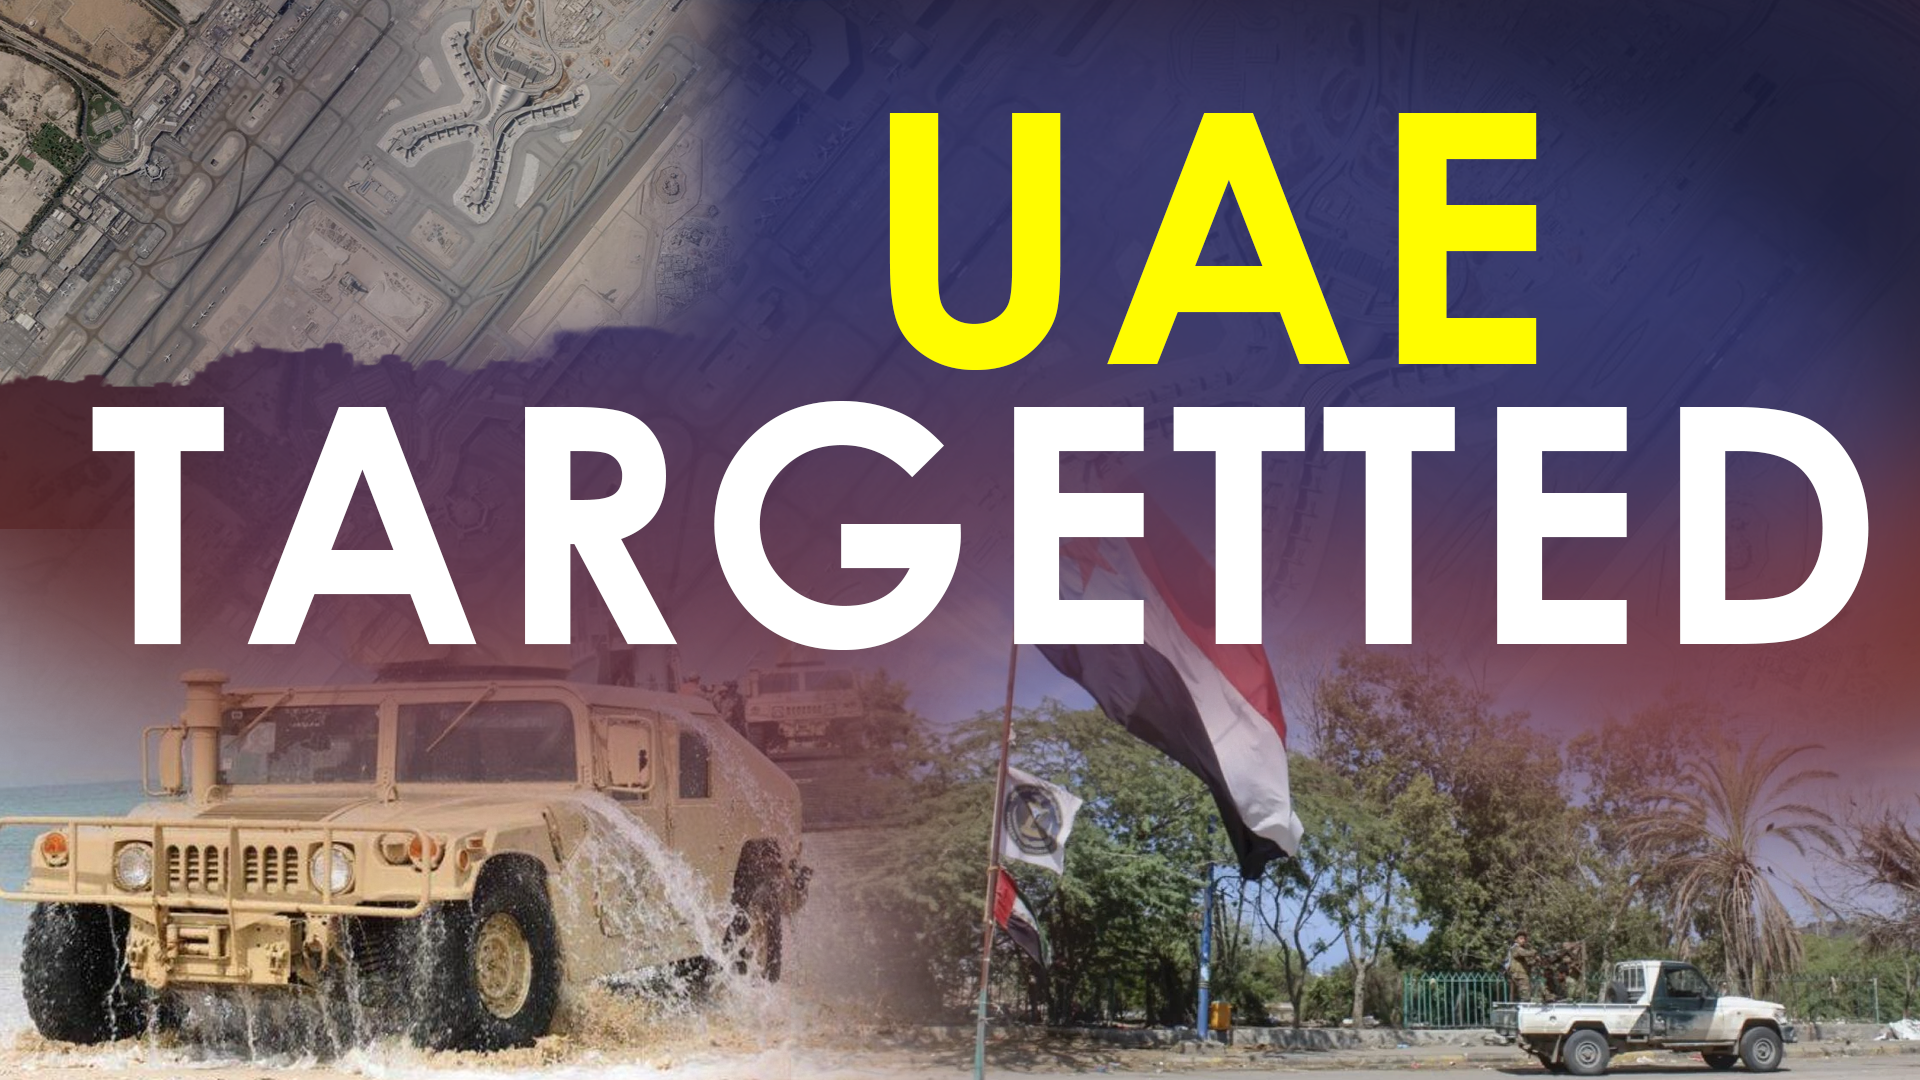 Yemeni army delivers on its promise: UAE targetted